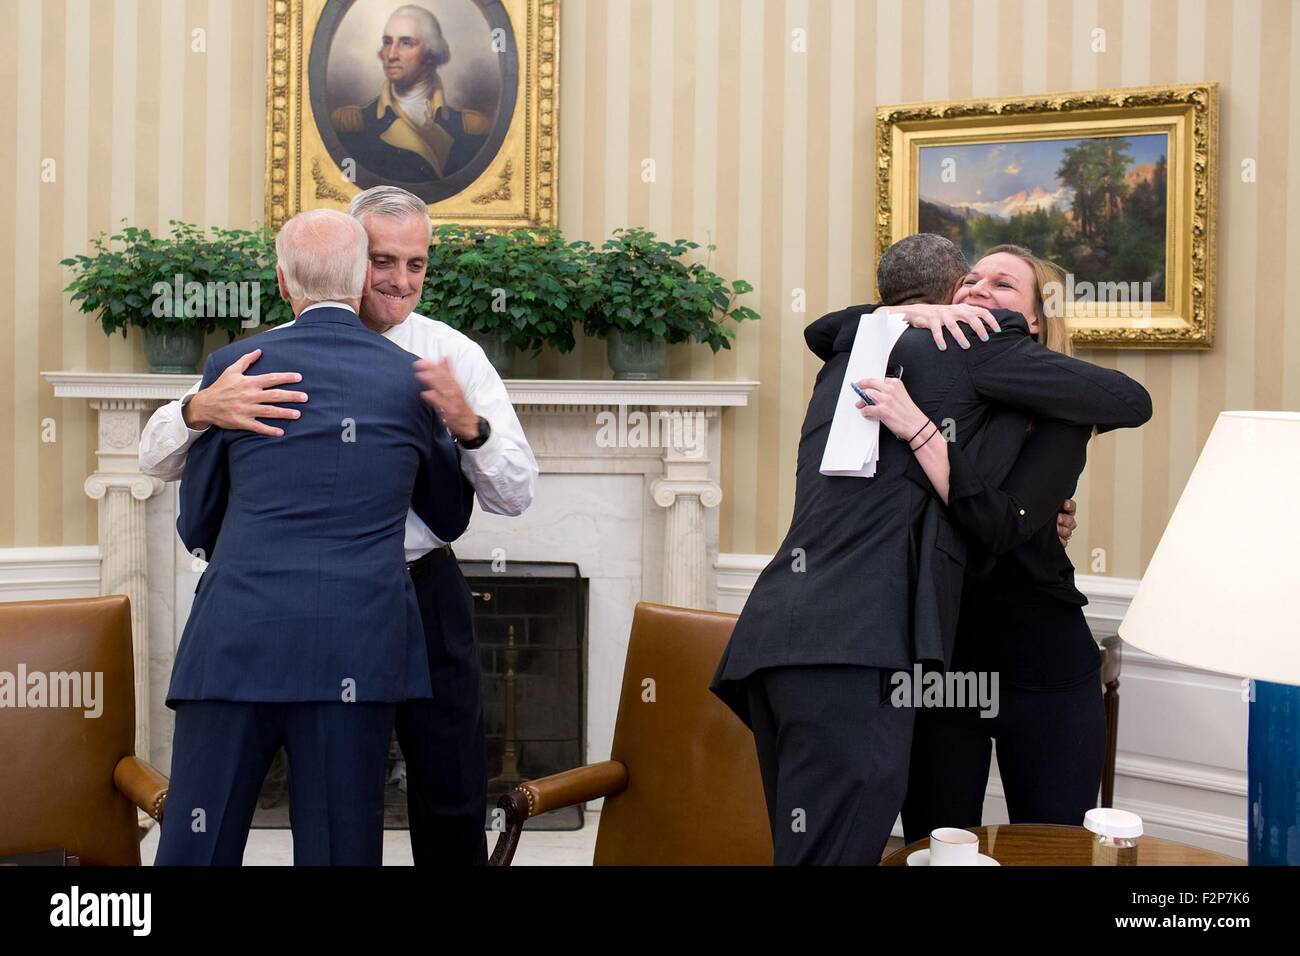 U.S. President Barack Obama is congratulated by Kristie Canegallo as Vice President Joe Biden embraces Denis McDonough in the Oval Office of the White House after the Supreme Court ruled in favor of the Affordable Care Act June 25, 2015 in Washington, DC. Stock Photo